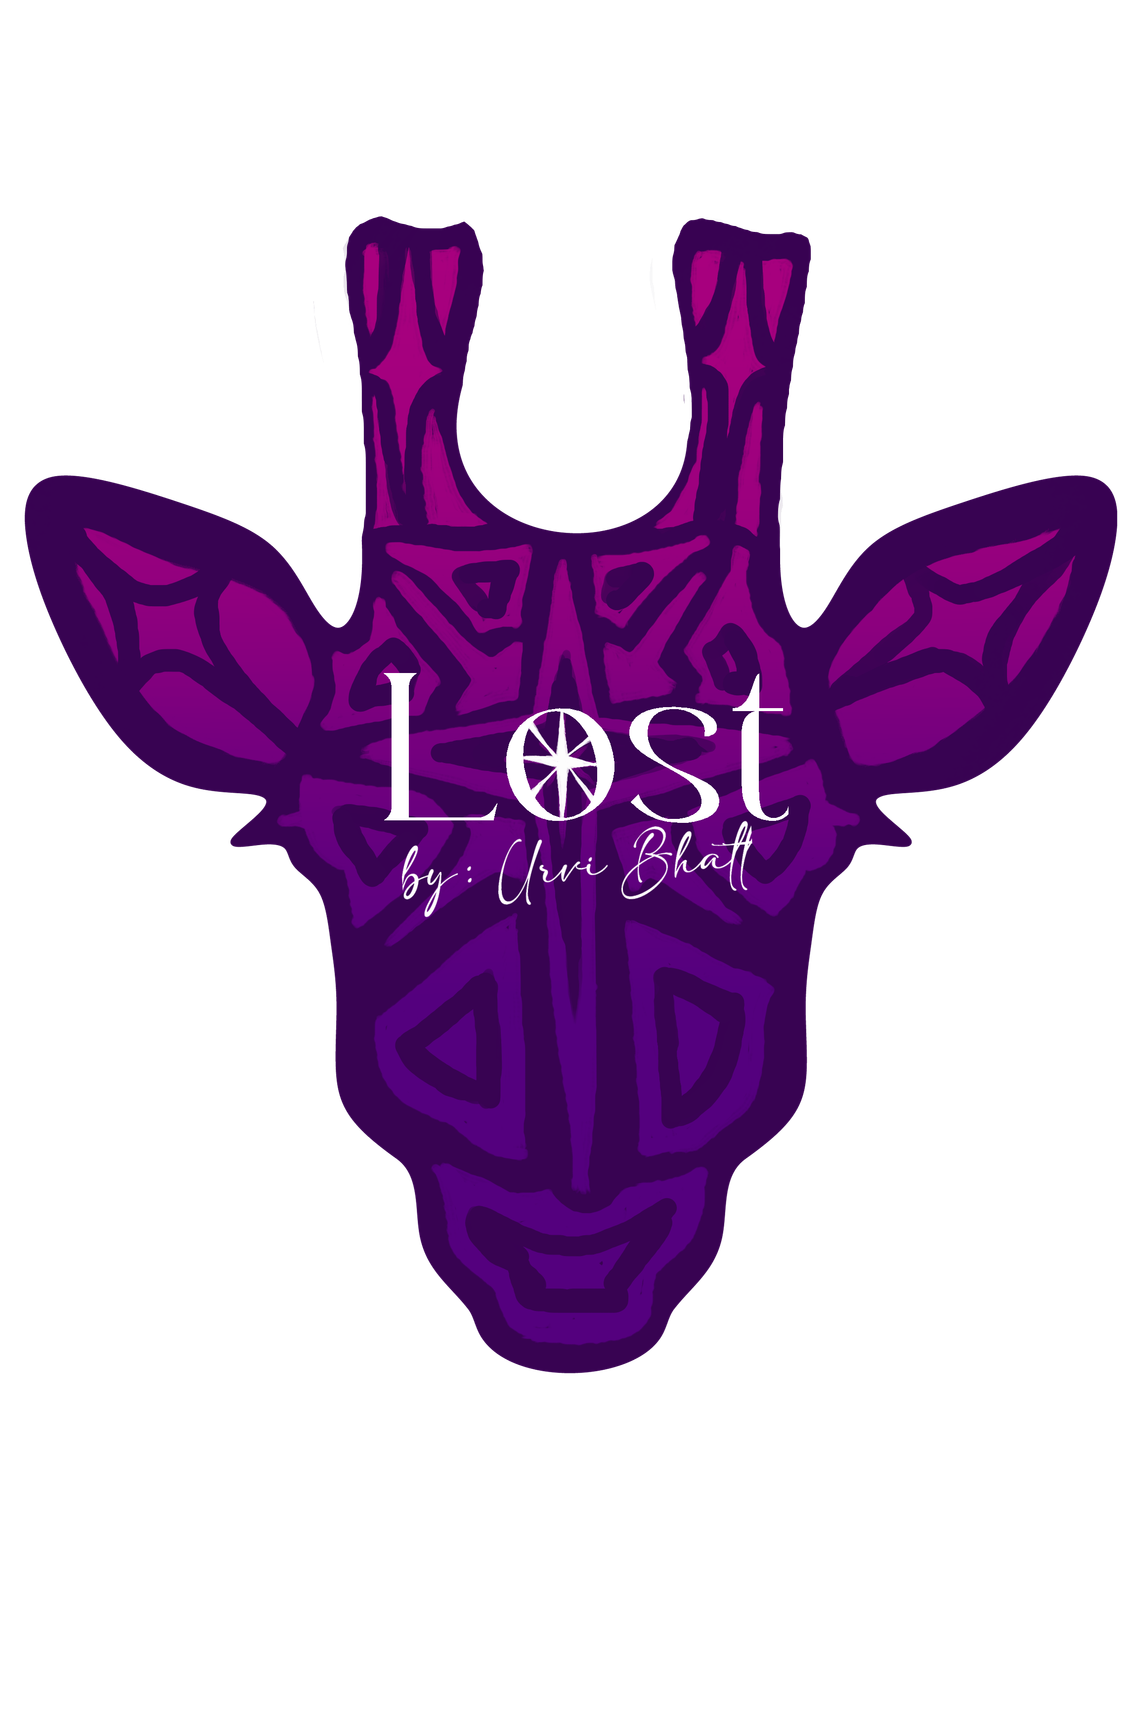 Text Reads: LOST by Urvi Bhatt (in white font). The text sits on the face of a purple giraffe. The image is a geometrically designed icon of a giraffes face, ears and horns all in shades of purple. The shapes within enhance the facial features.